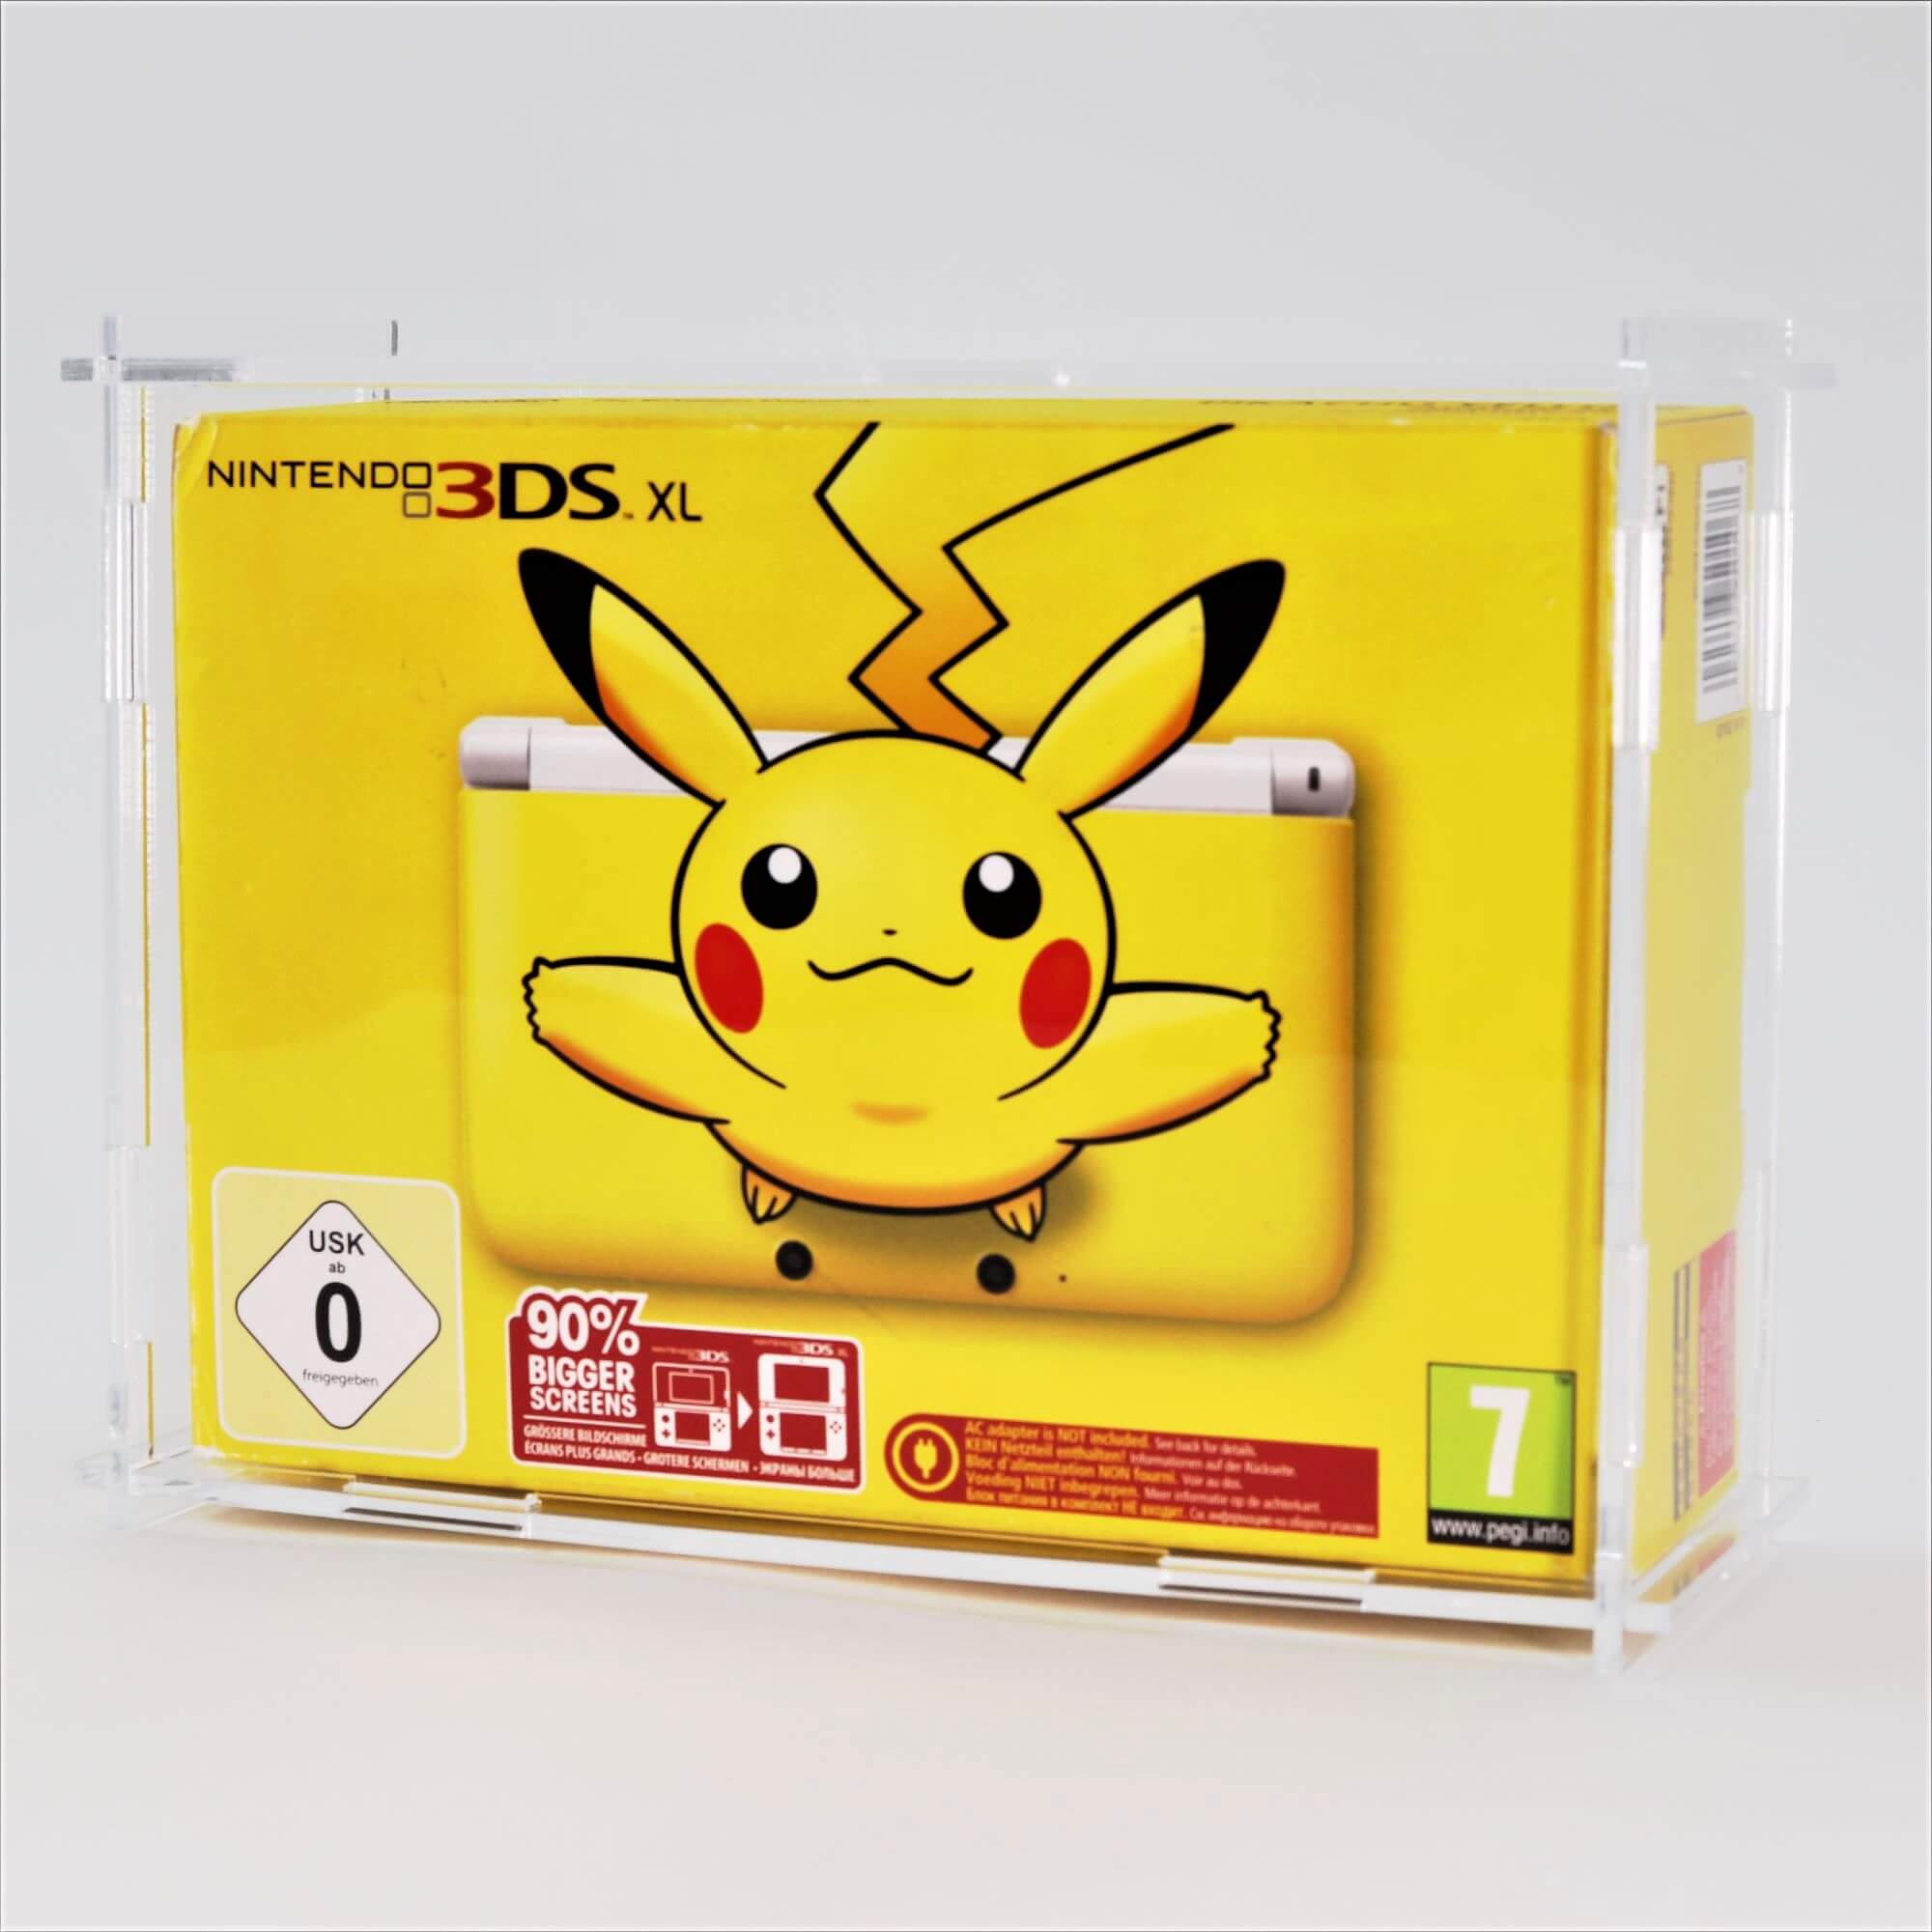 Phot of a Nintendo 3DS XL Boxed Console Display Case